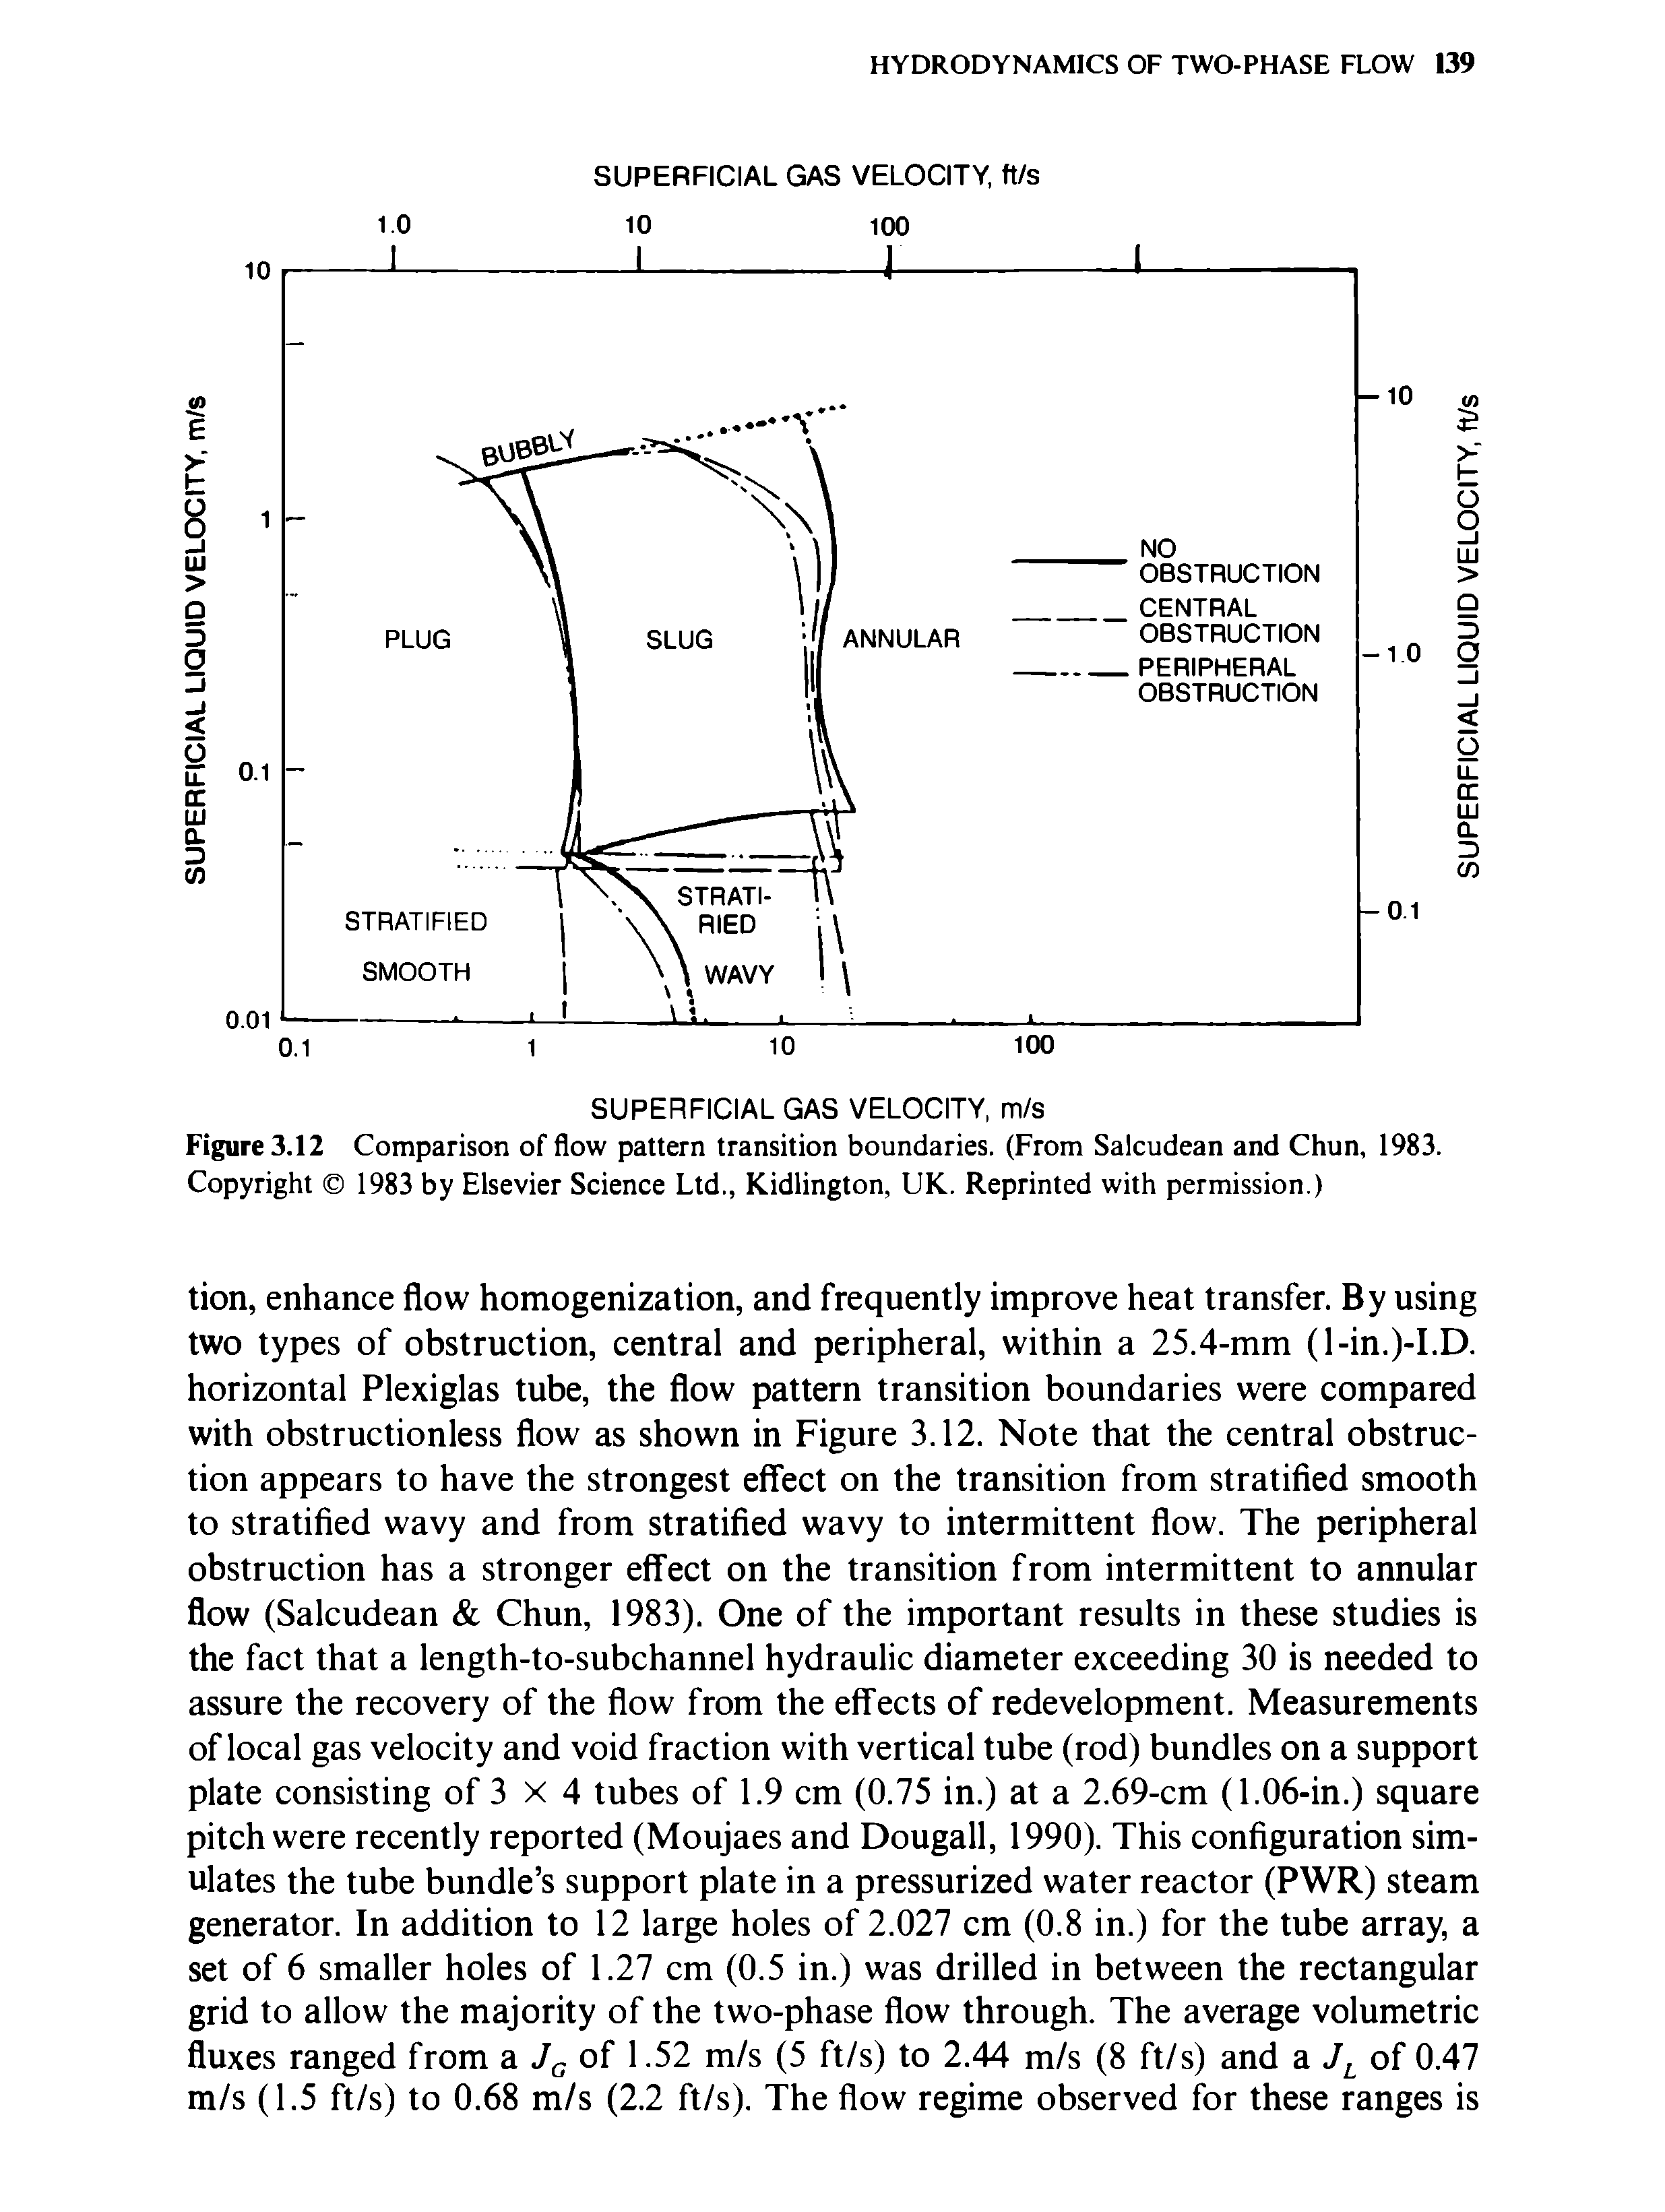 Figure 3.12 Comparison of flow pattern transition boundaries. (From Salcudean and Chun, 1983. Copyright 1983 by Elsevier Science Ltd., Kidlington, UK. Reprinted with permission.)...